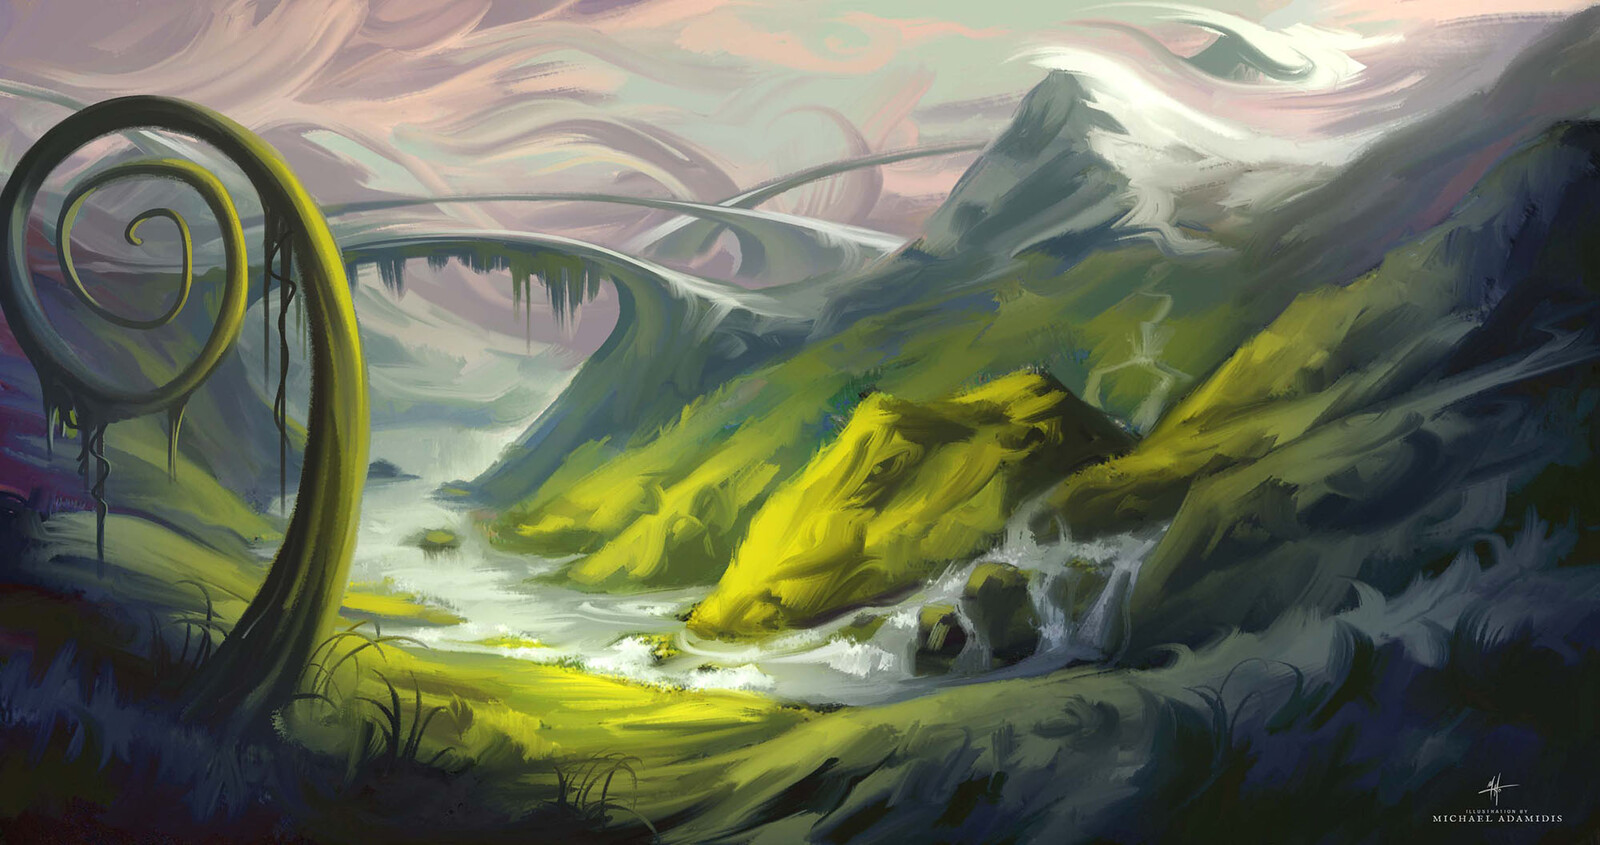 Digital Fantasy Art / Landscape / Scenery Painting - (with Process)